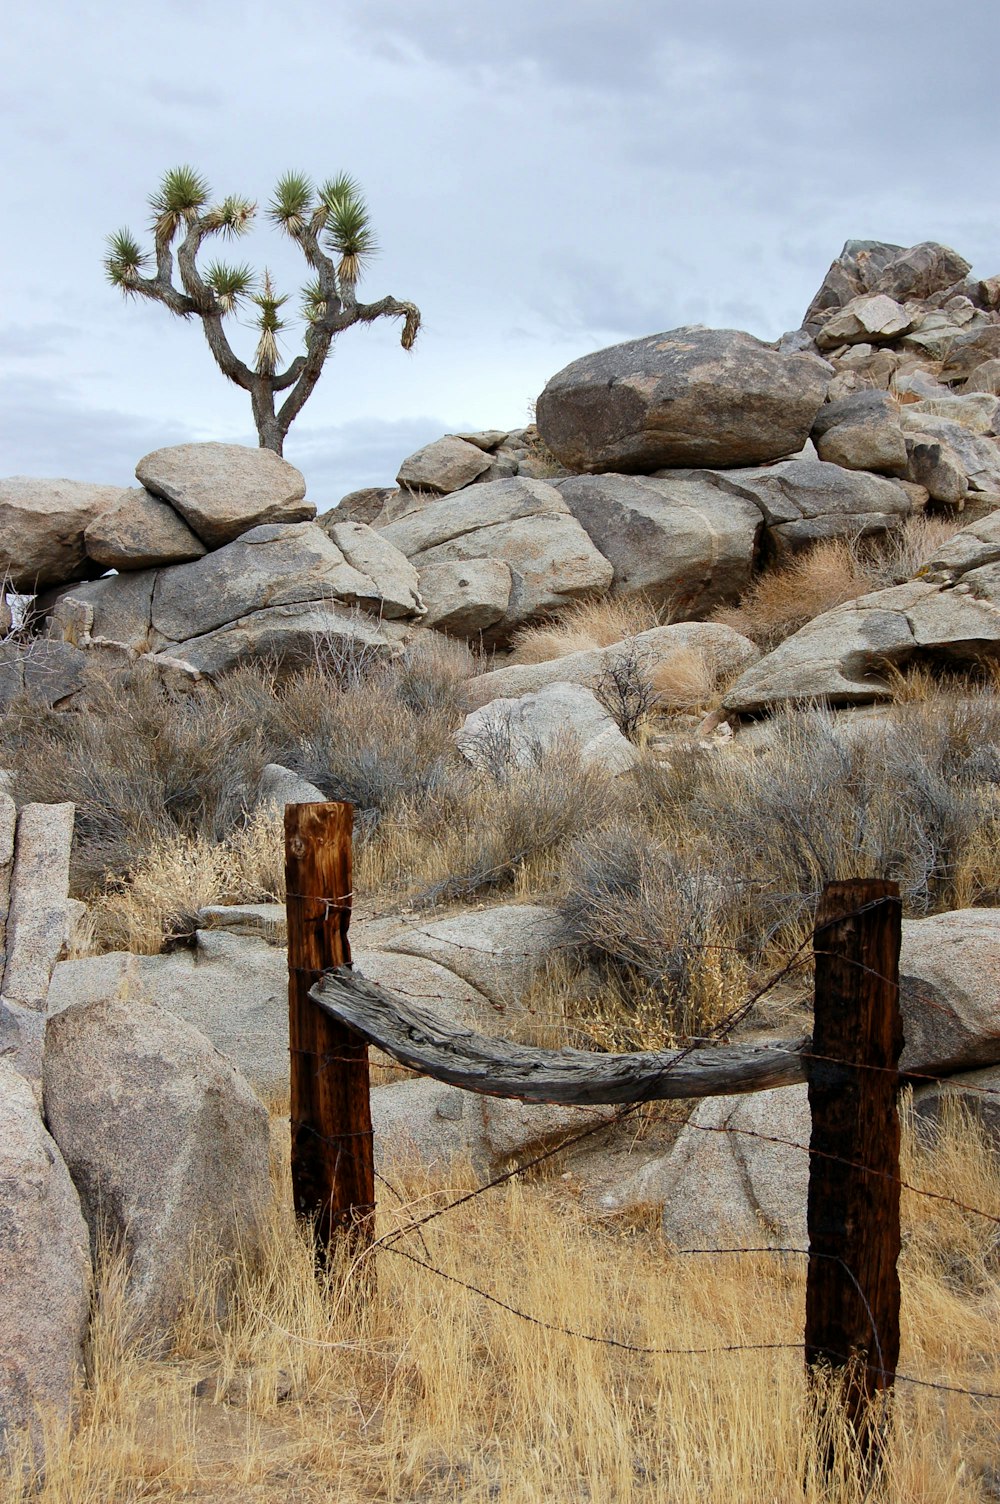 a wooden fence in front of some rocks and a cactus